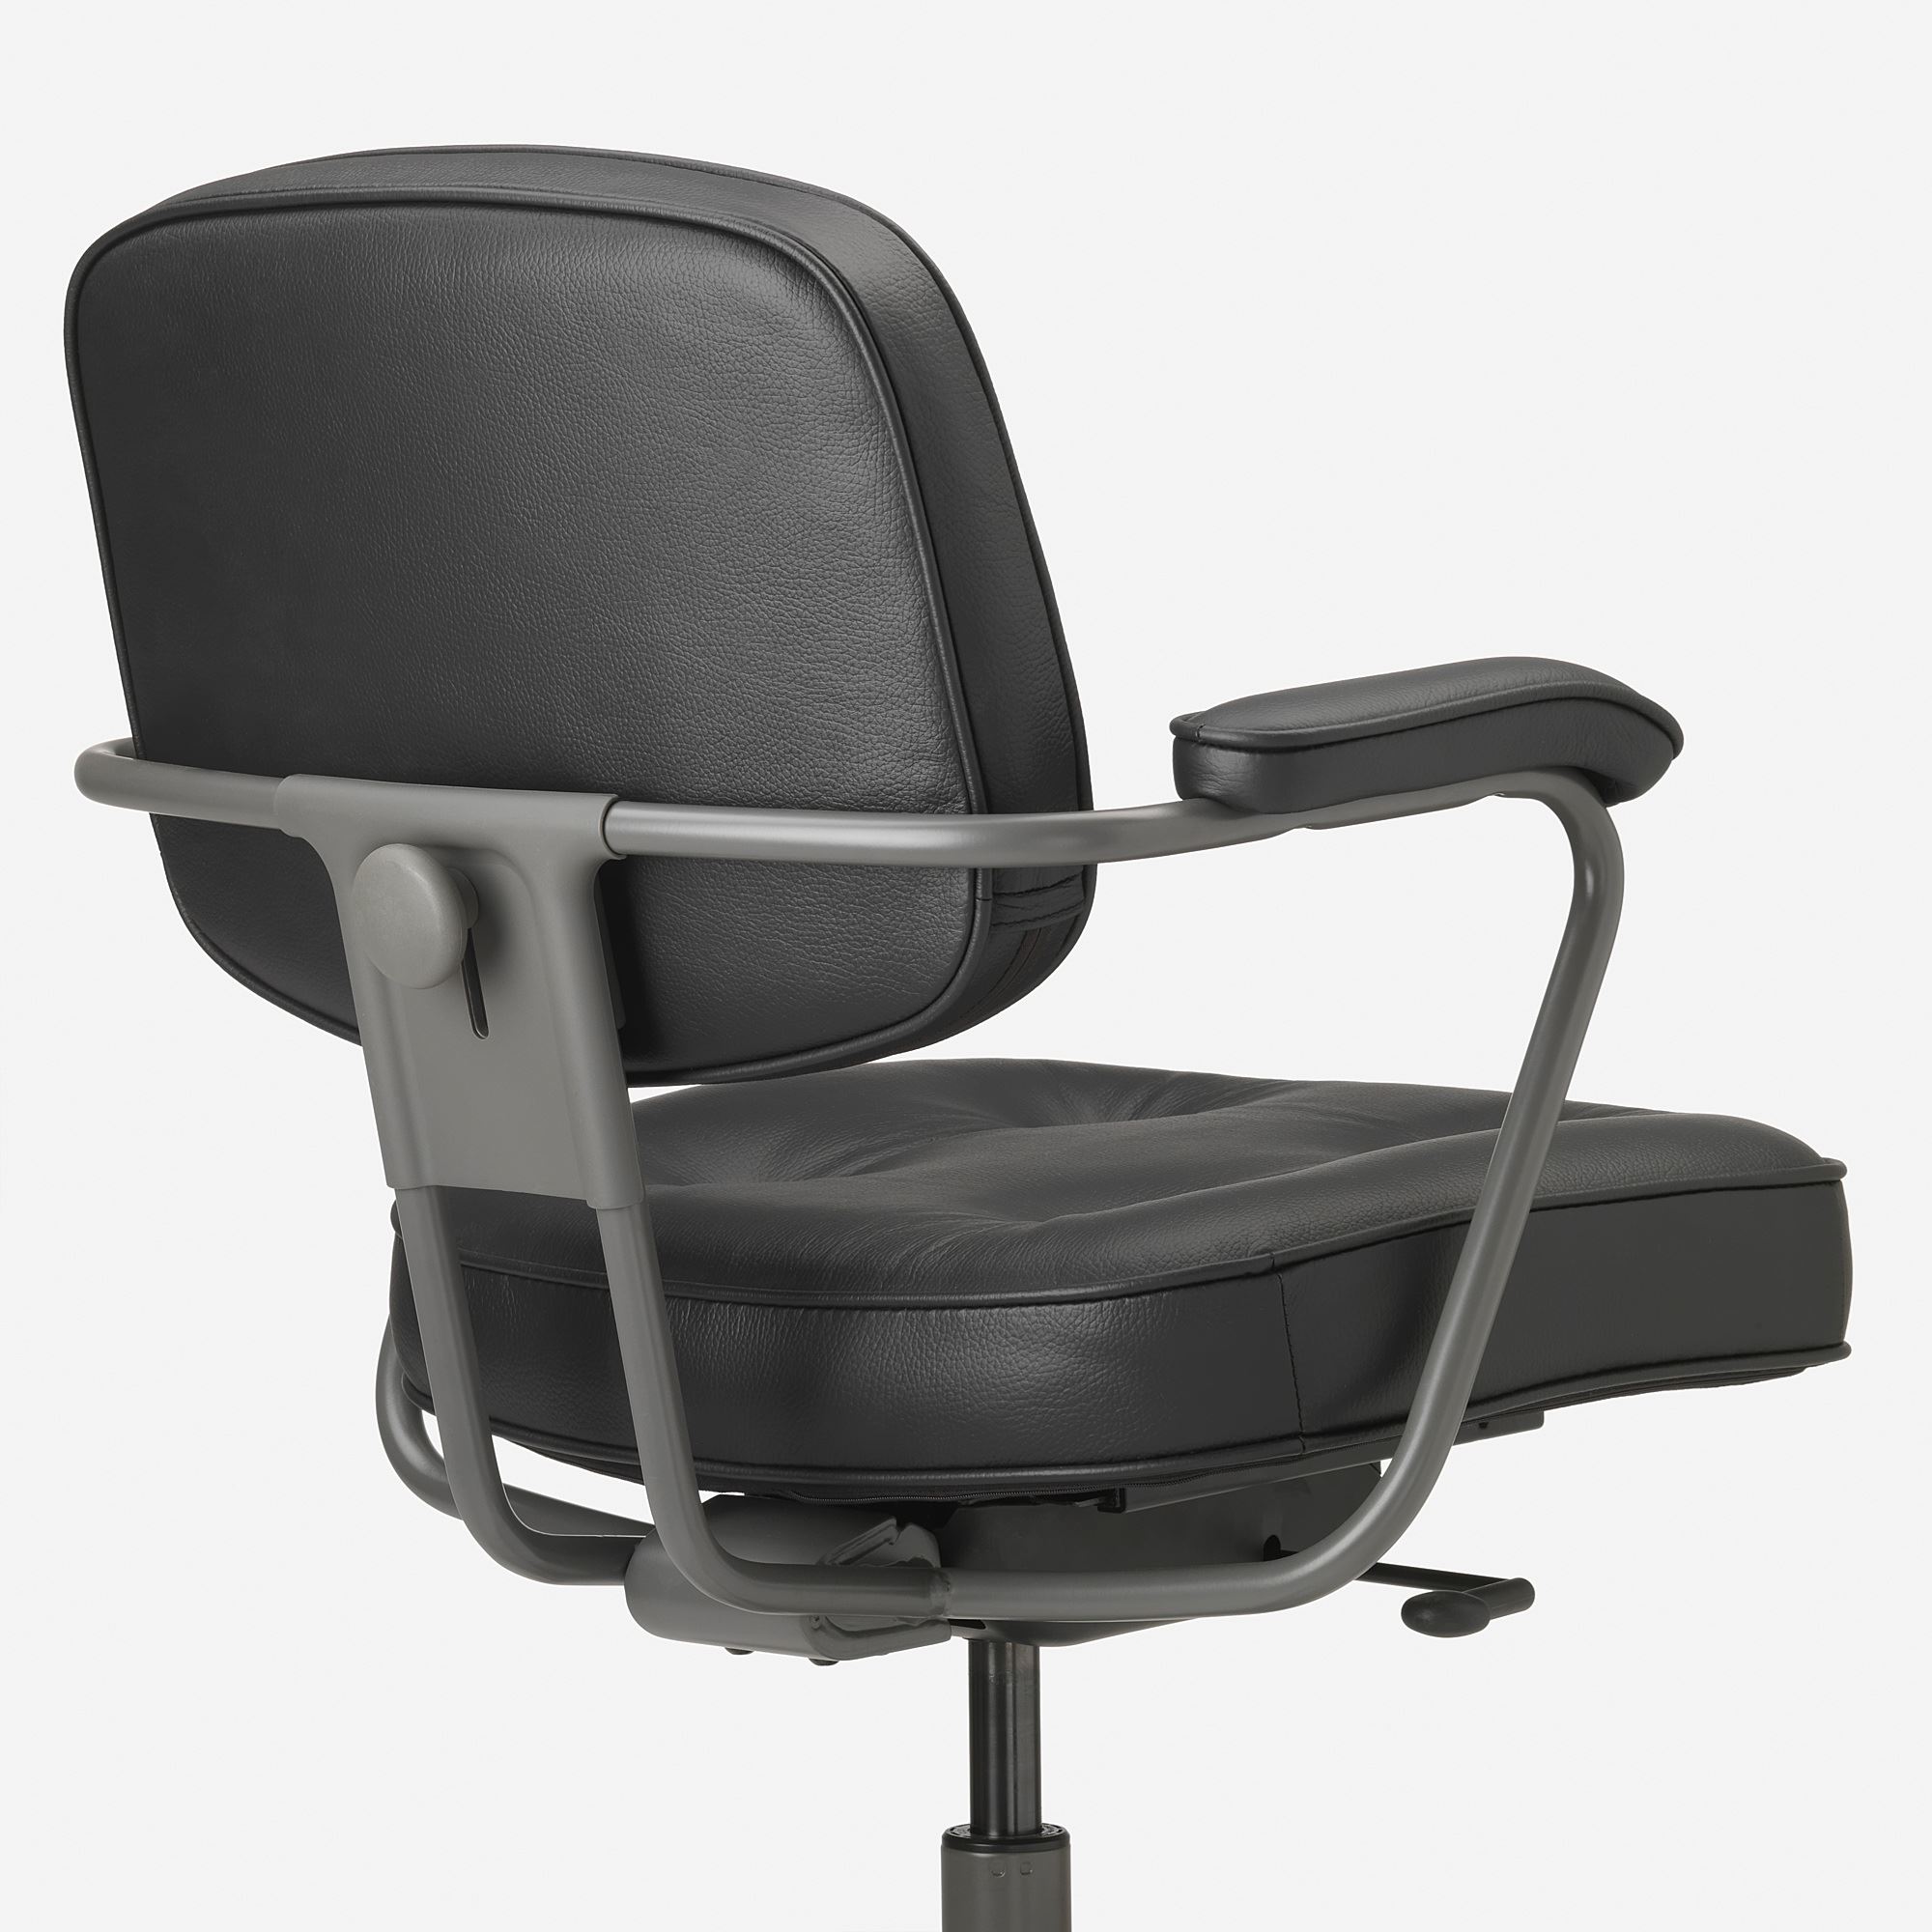 Unique Swivel Office Chairs At Ikea for Simple Design